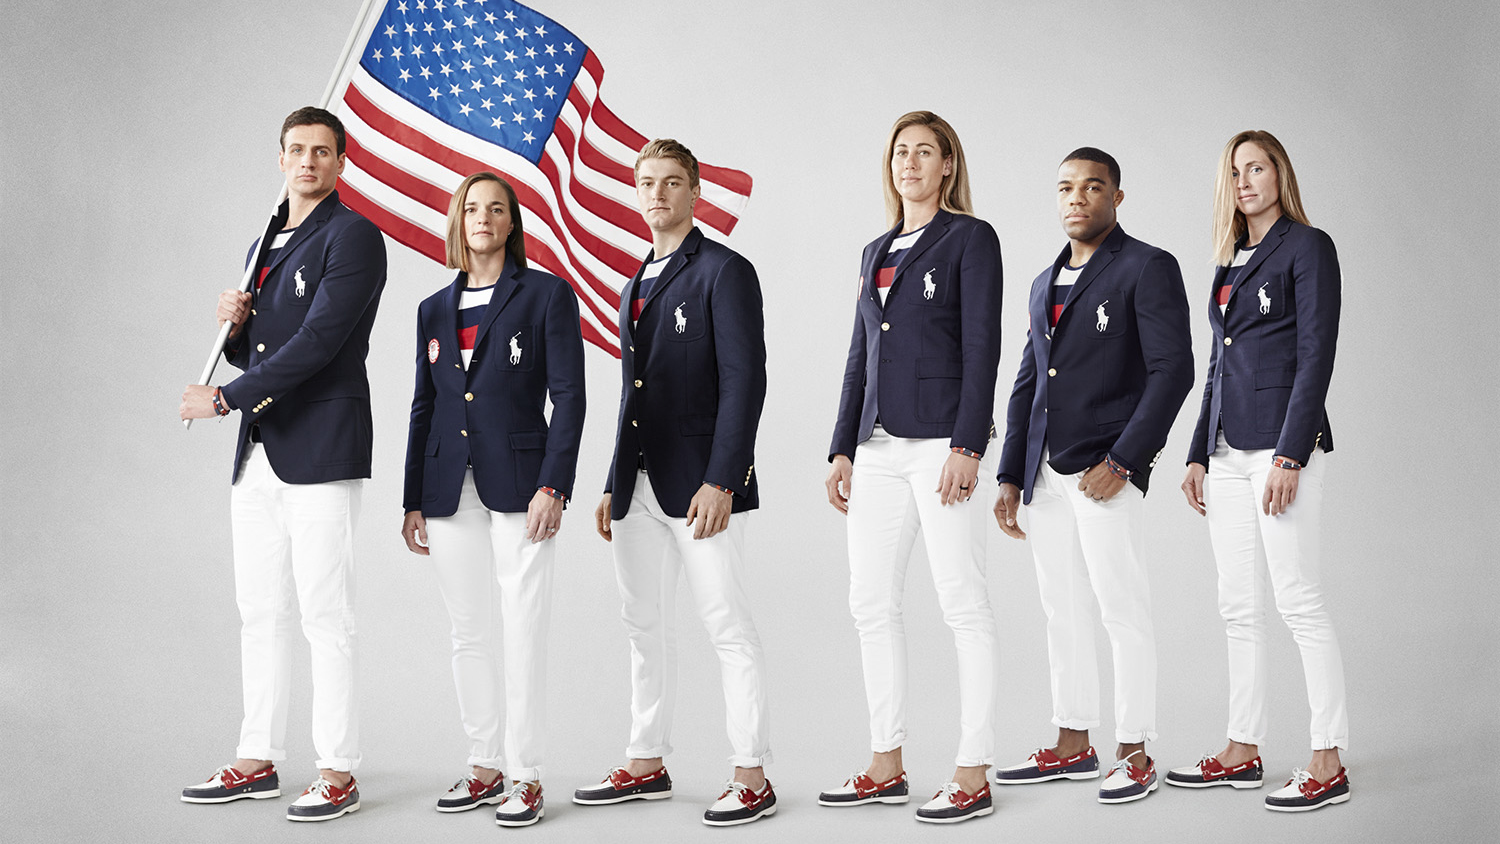 See Team USA's Olympic opening ceremony uniforms